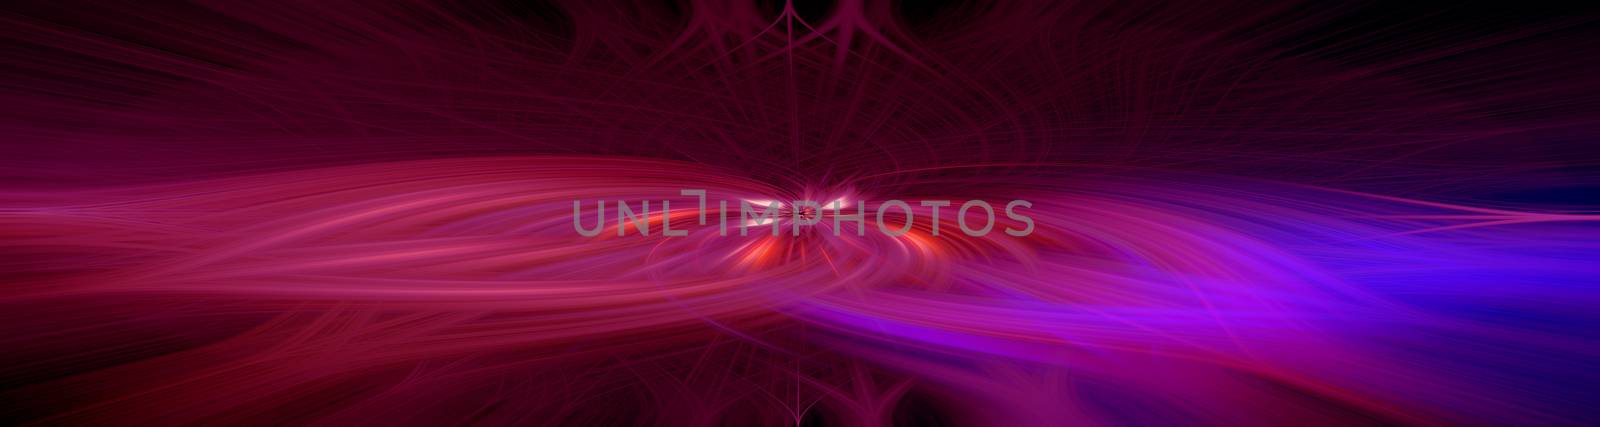 Beautiful abstract intertwined 3d fibers forming an ornament out of various symmetrical shapes. Purple, red, and blue colors. Black background. Banner size. Illustration.